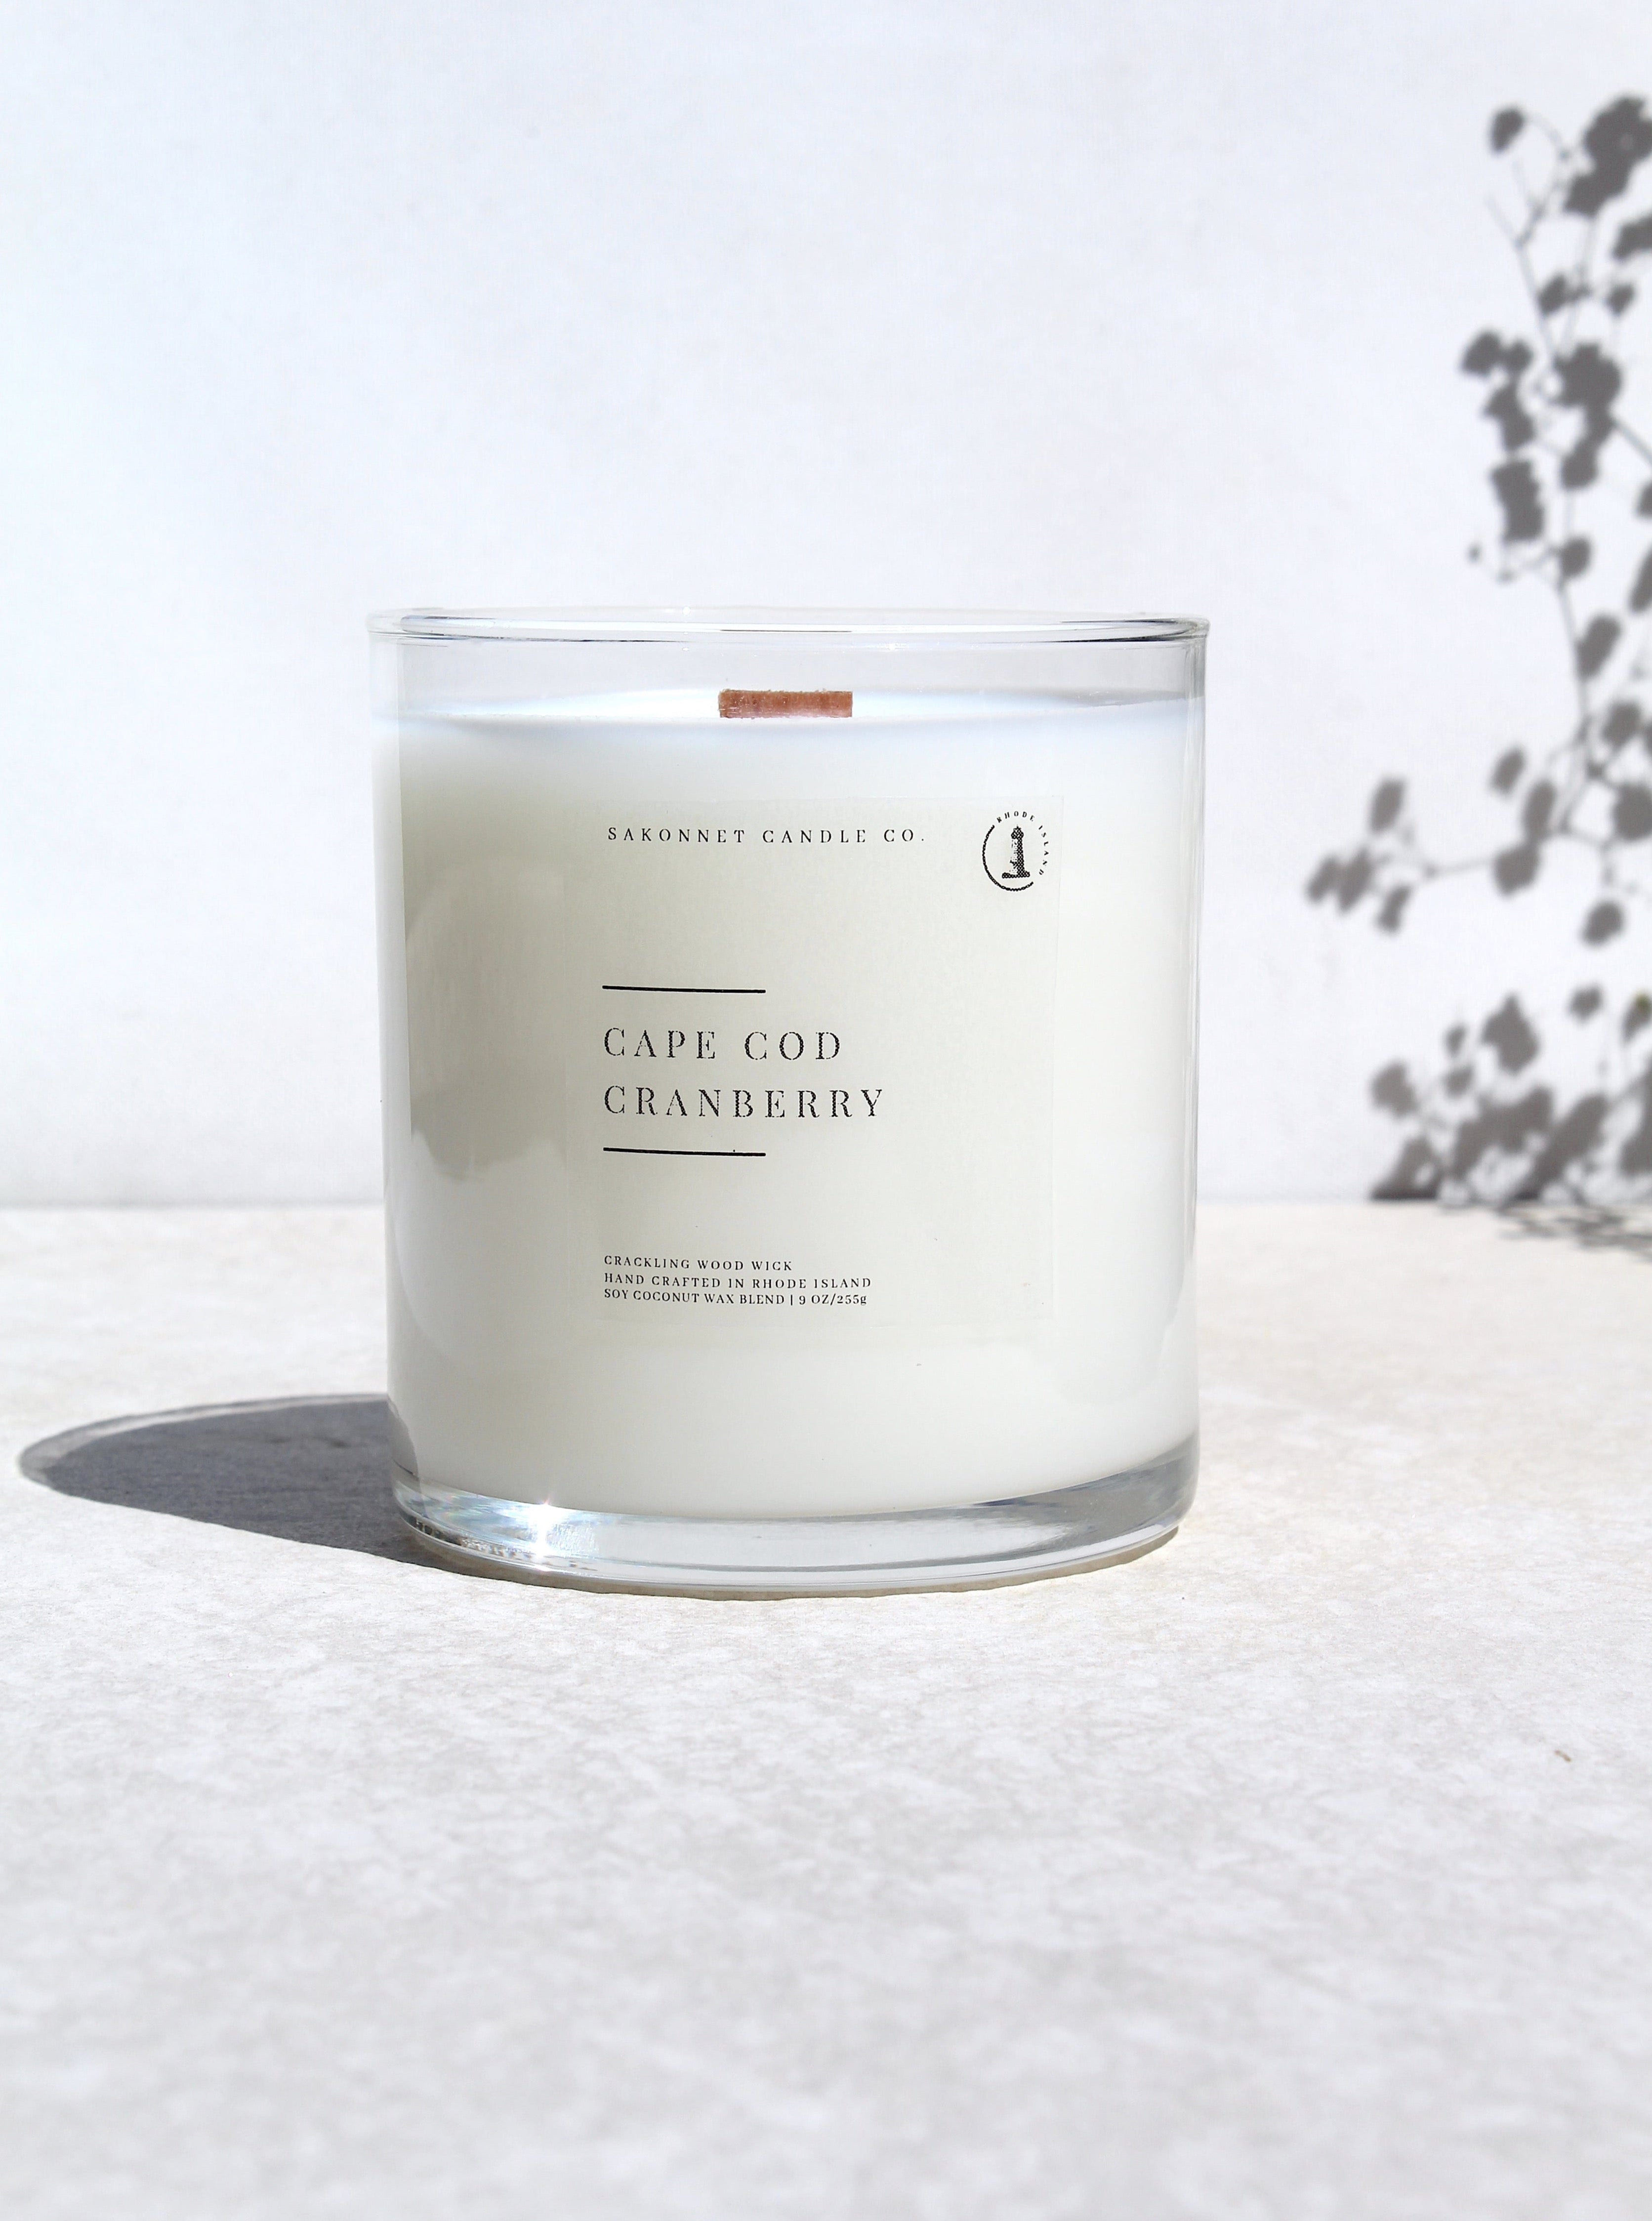 Cape Cod Cranberry Soy Candle